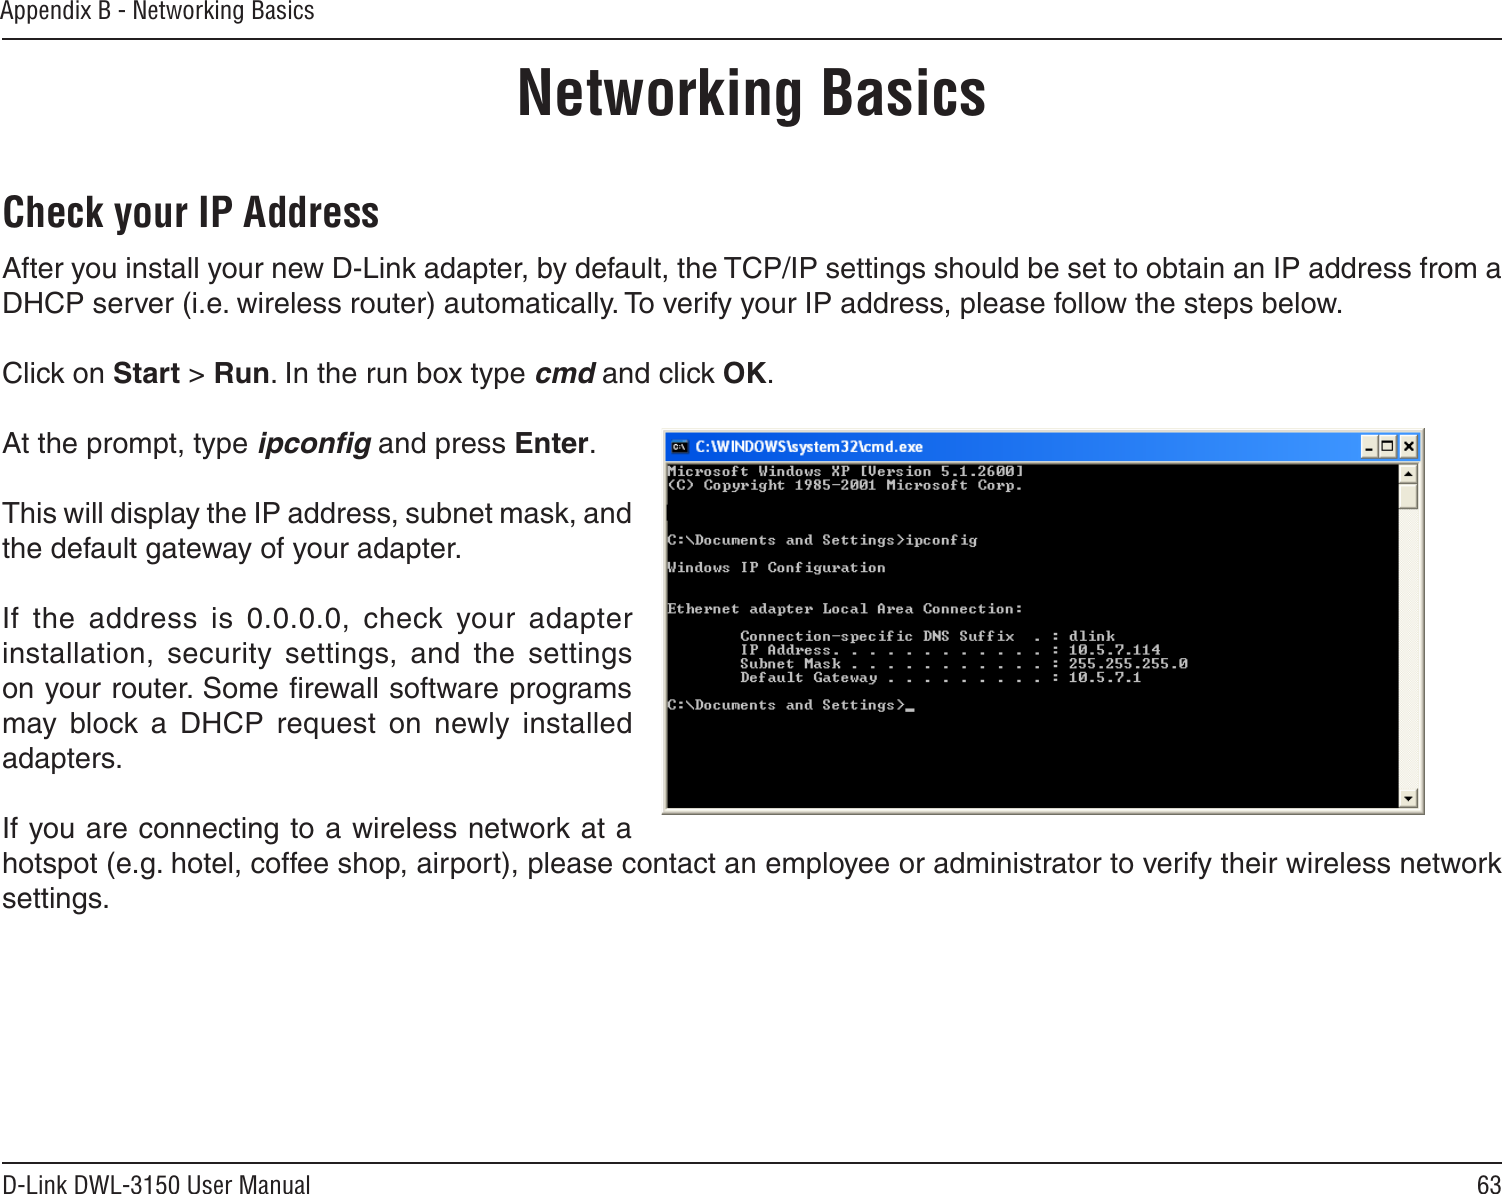 63D-Link DWL-3150 User ManualAppendix B - Networking BasicsNetworking BasicsCheck your IP AddressAfter you install your new D-Link adapter, by default, the TCP/IP settings should be set to obtain an IP address from a DHCP server (i.e. wireless router) automatically. To verify your IP address, please follow the steps below.Click on Start &gt; Run. In the run box type cmd and click OK.At the prompt, type ipconﬁg and press Enter.This will display the IP address, subnet mask, and the default gateway of your adapter.If  the  address  is  0.0.0.0,  check  your  adapter installation,  security  settings,  and  the  settings on your router. Some ﬁrewall software programs may  block  a  DHCP  request  on  newly  installed adapters. If you are connecting to a wireless network at a hotspot (e.g. hotel, coffee shop, airport), please contact an employee or administrator to verify their wireless network settings.